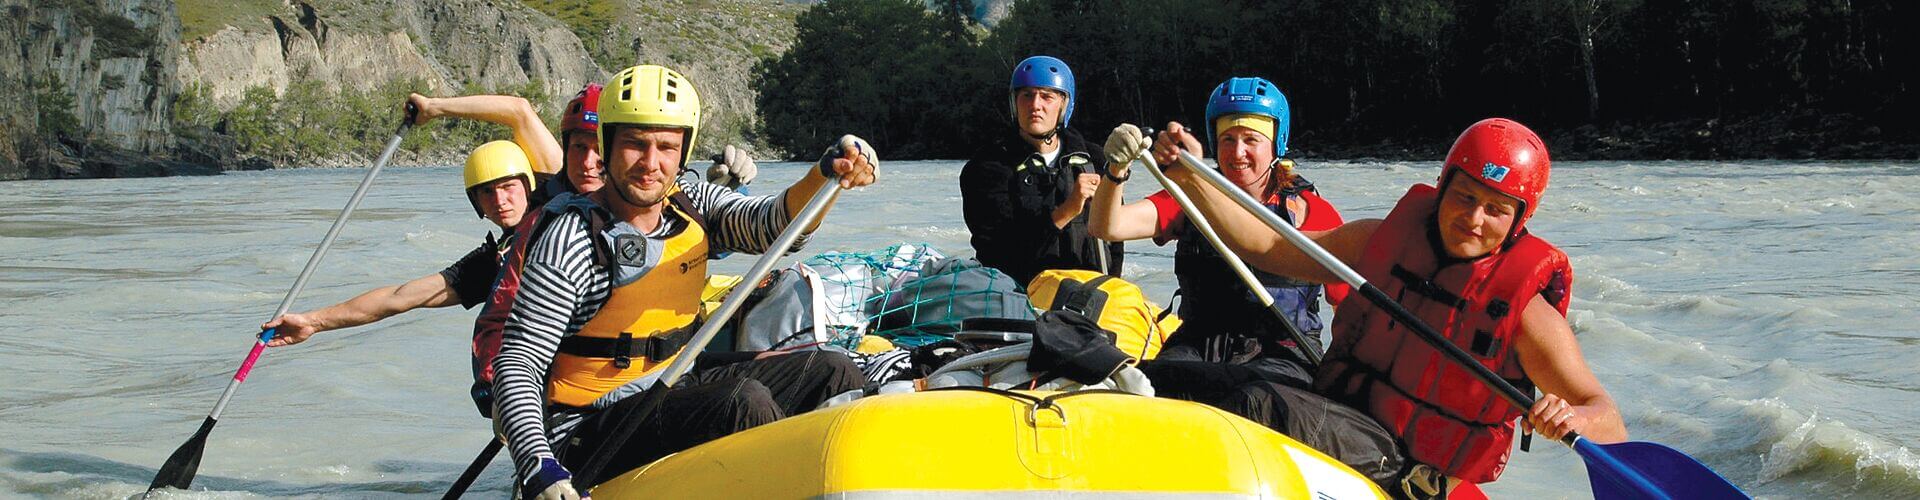 White water rafting in Canada